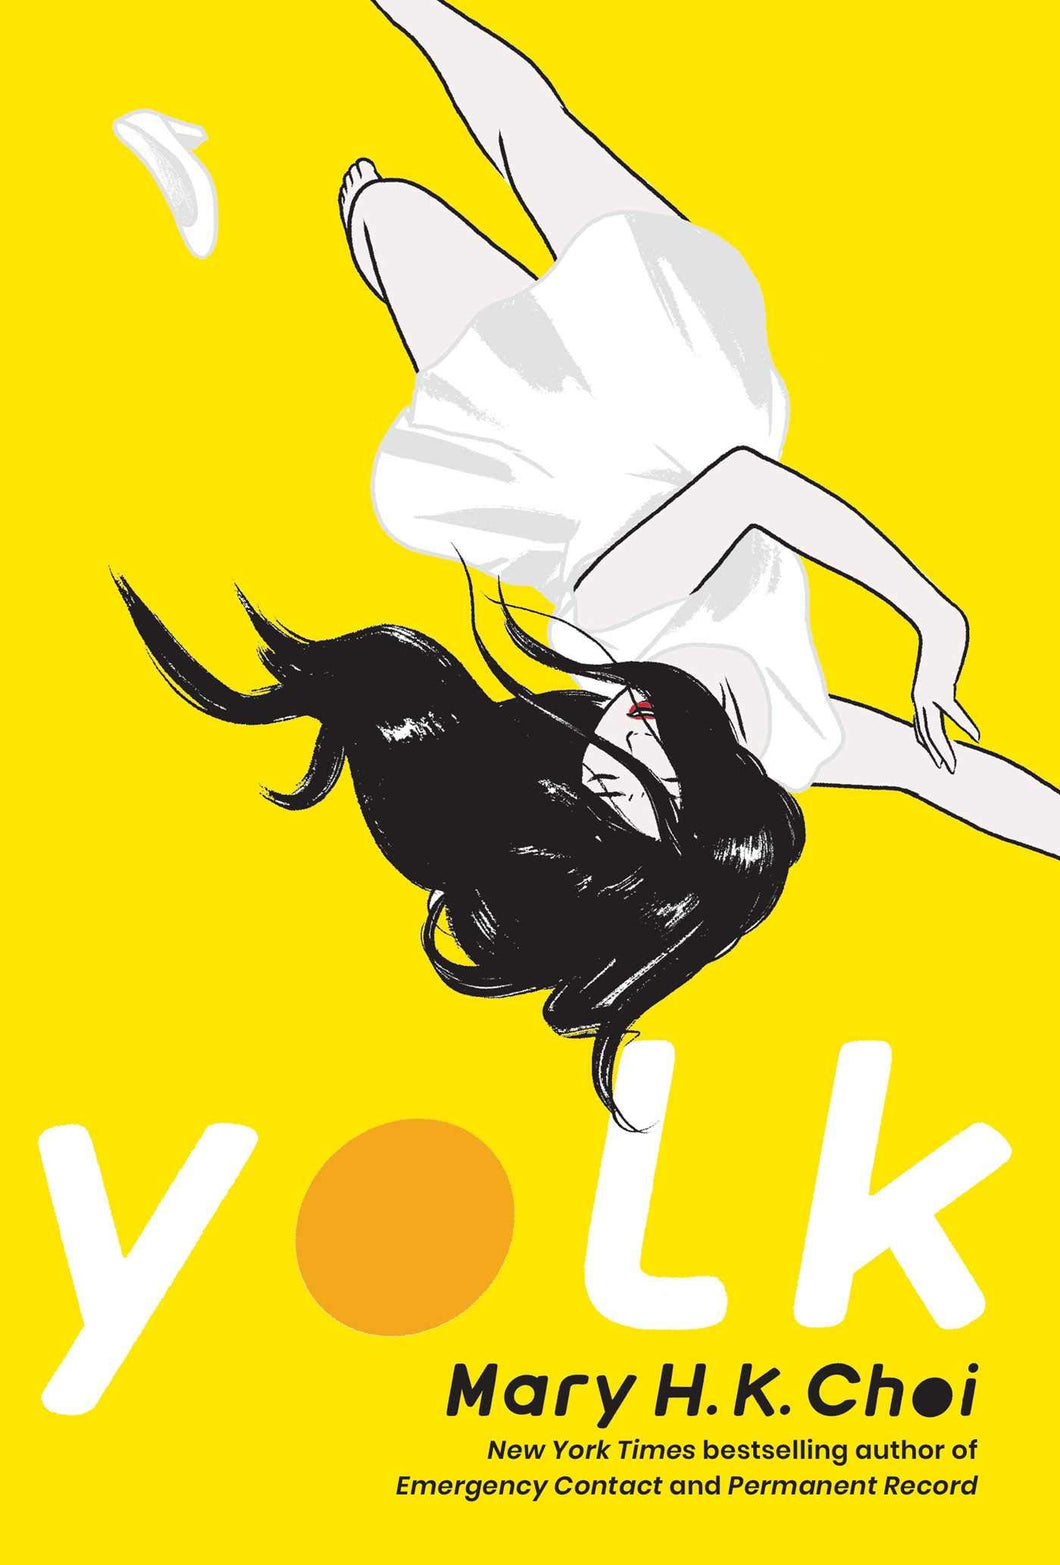 Yolk by Mary H. K. Choi / Hardcover or Paperback - NEW BOOK